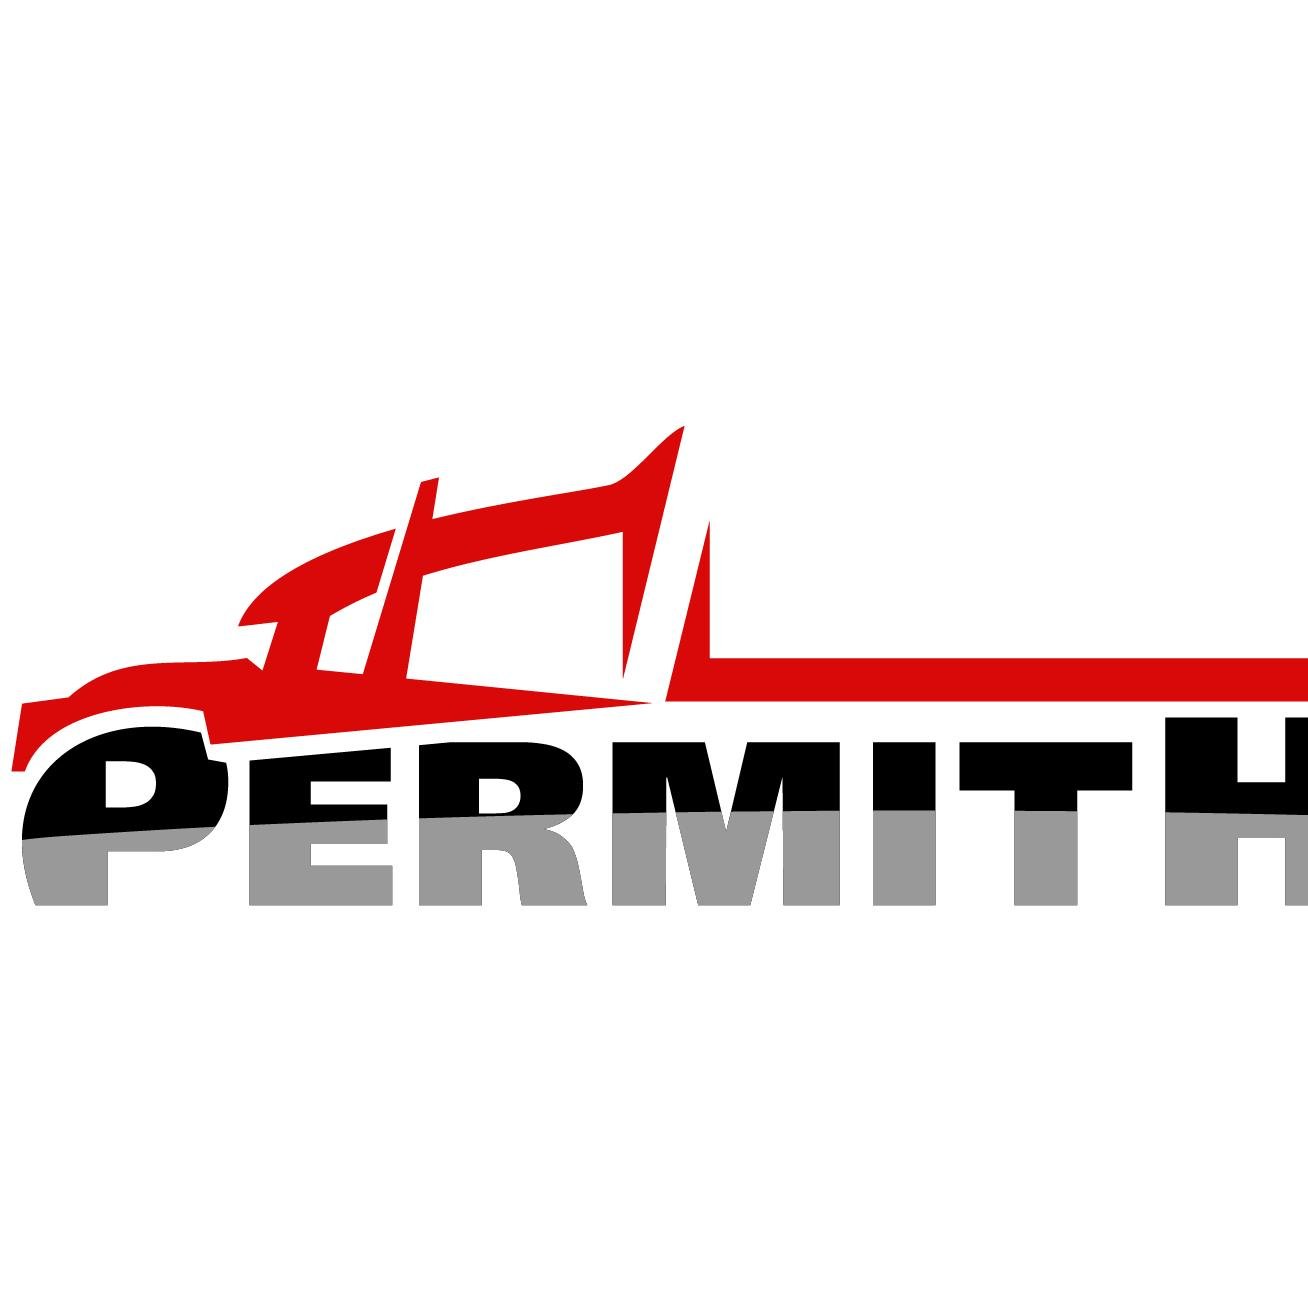 NEW Permit Service
855-413-5147 
Oversize - Overweight - Trip - Fuel